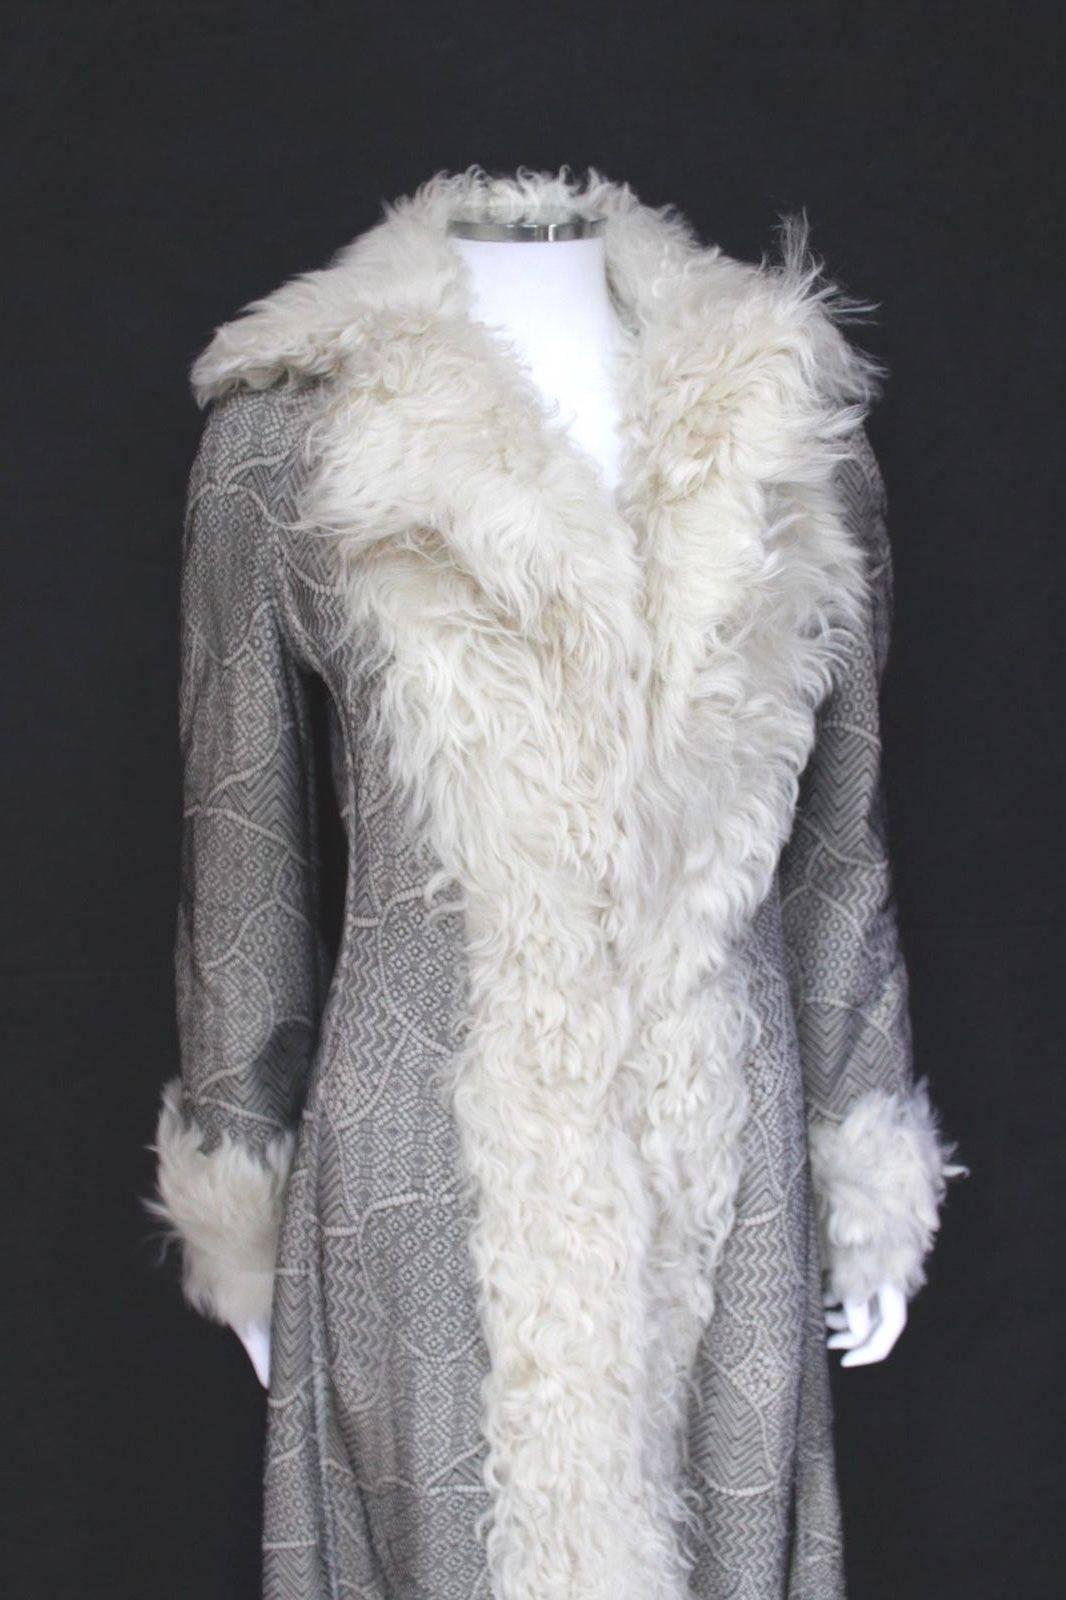 Christian Dior Beige Sheepskin Shearling Lace Overlay Suede Coat UK 8
Amazing long shearling coat from Christian Dior Paris features white shearling double collar

Delicate black lace overlay throughout. 

Long sleeve with hook eye closure to